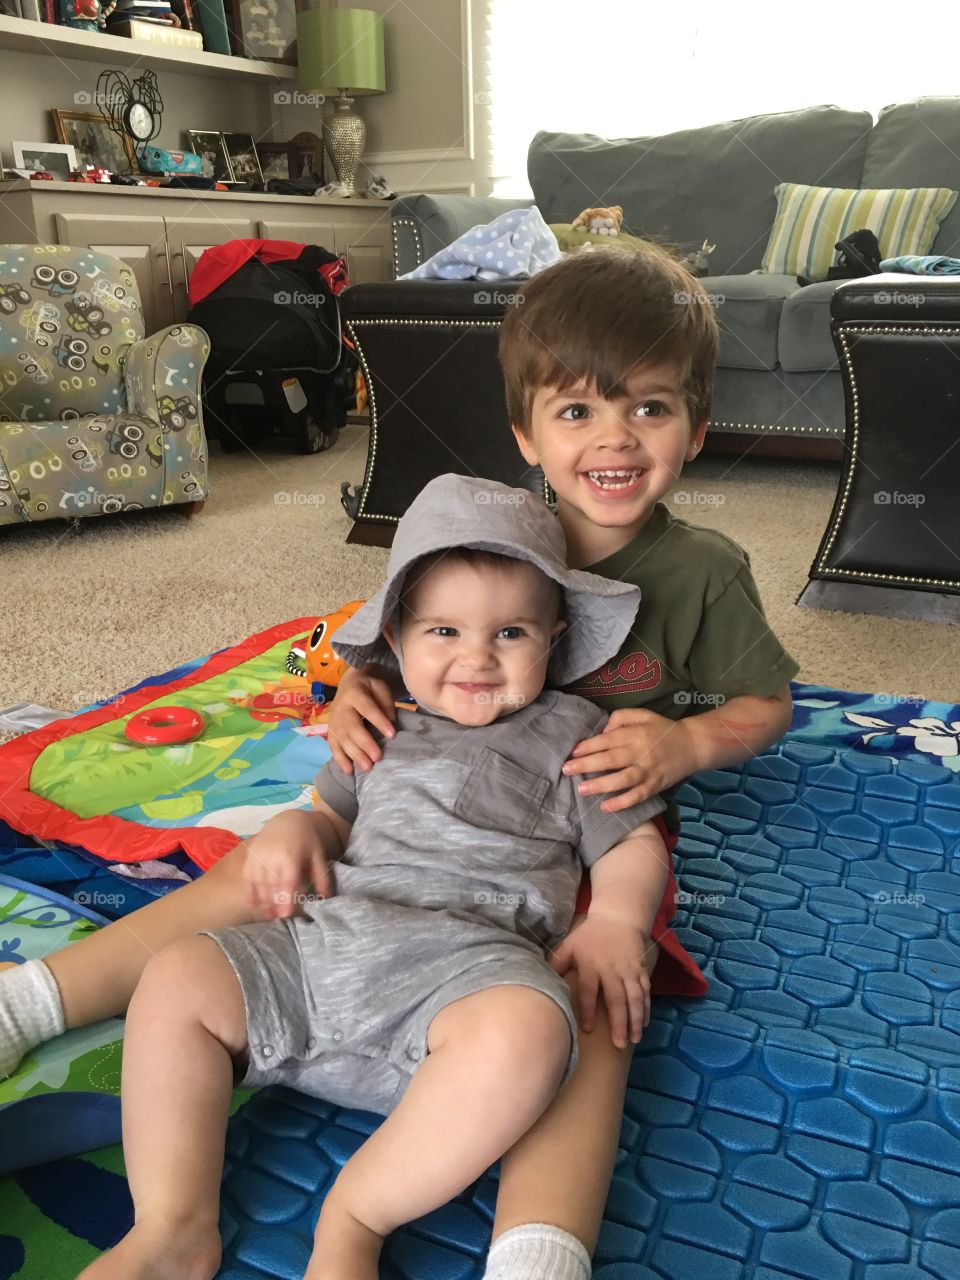 Brothers. Baby boy and toddler smiling together.